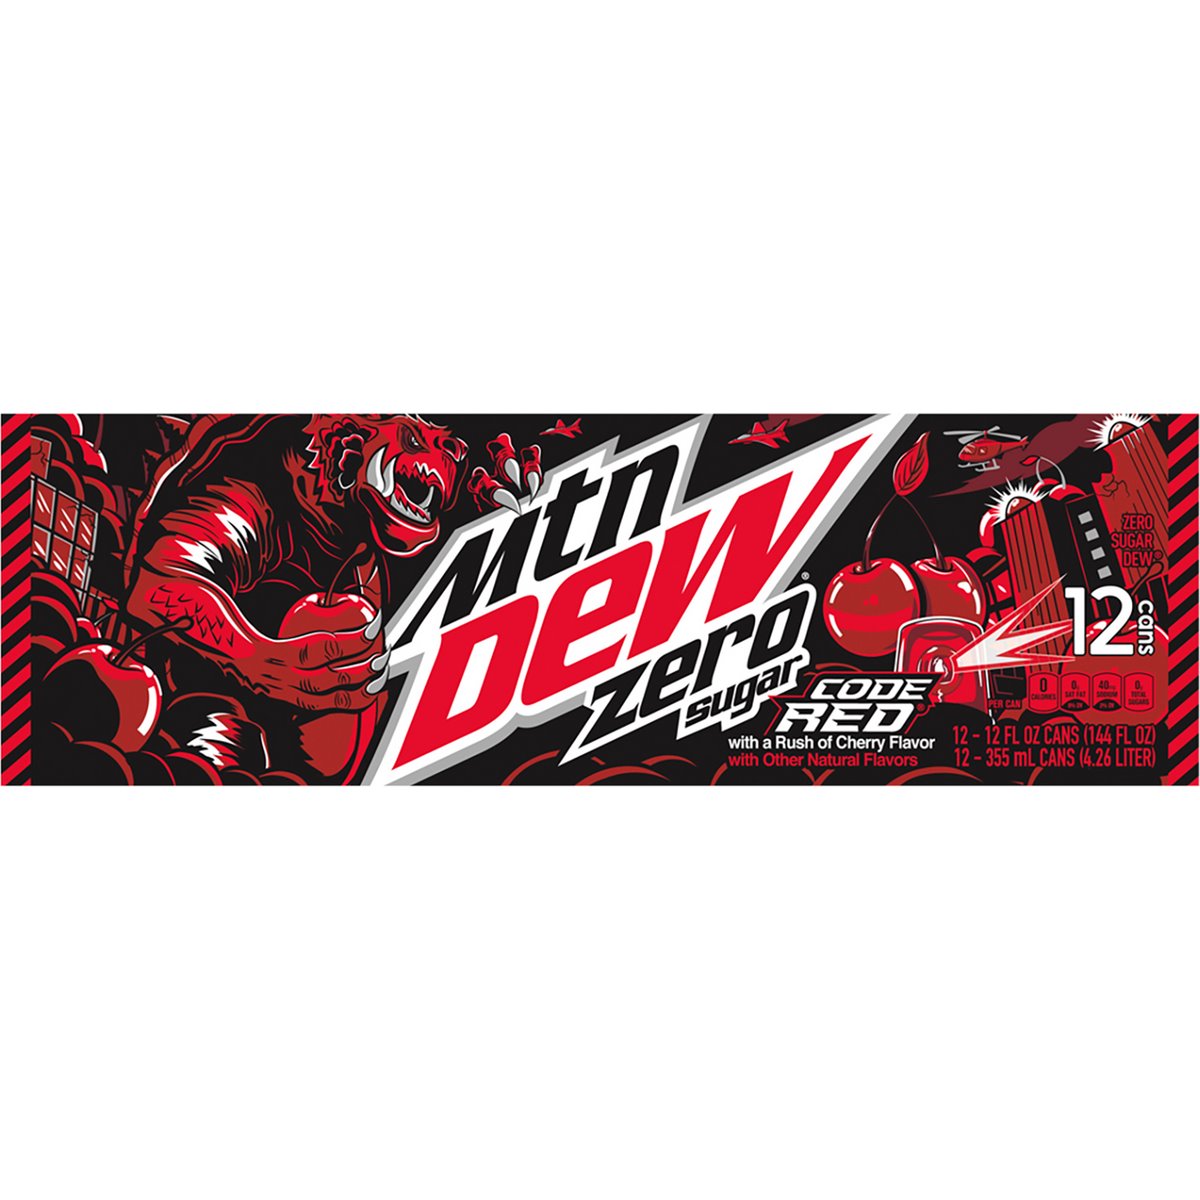 Order Acme Mountain Dew Soda Code Red Diet